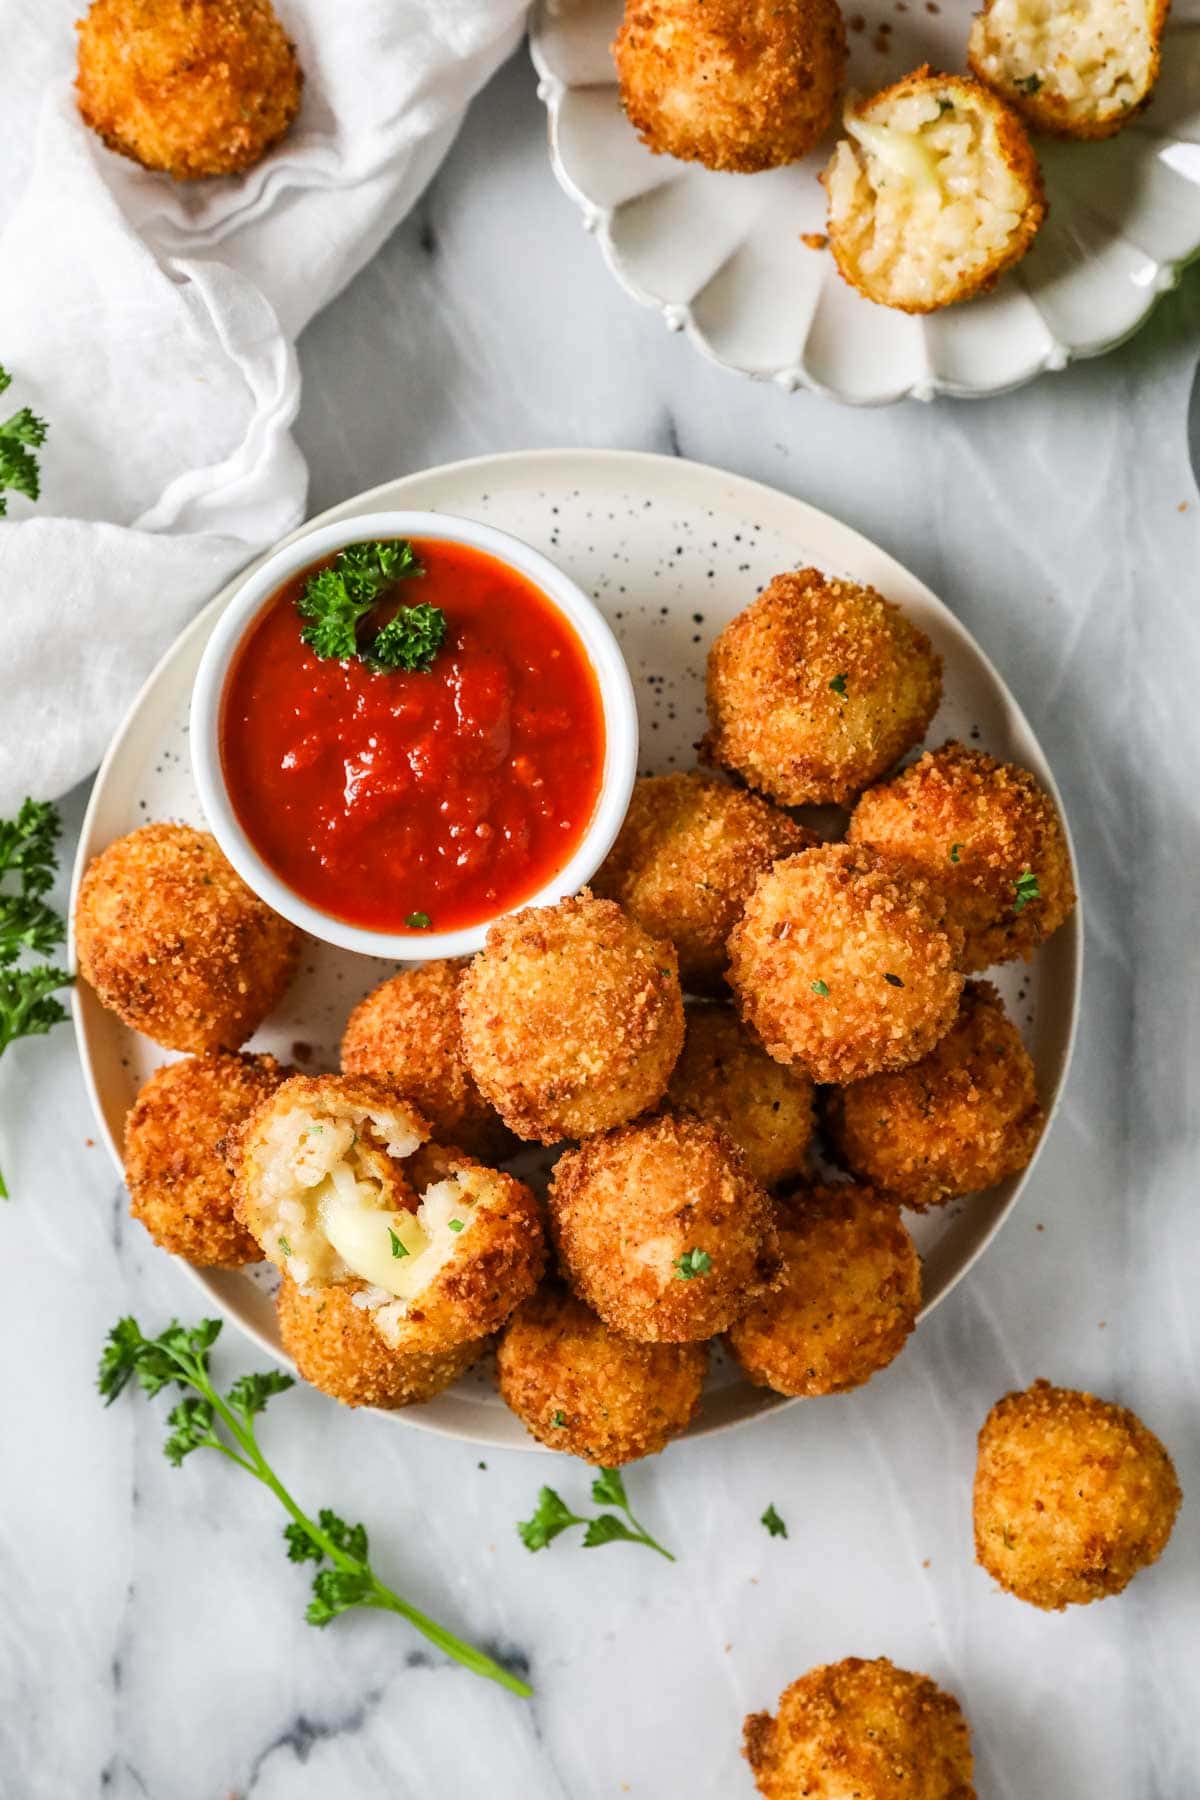 Overhead view of a bowl Sicilian fried rice balls with marinara for dipping.